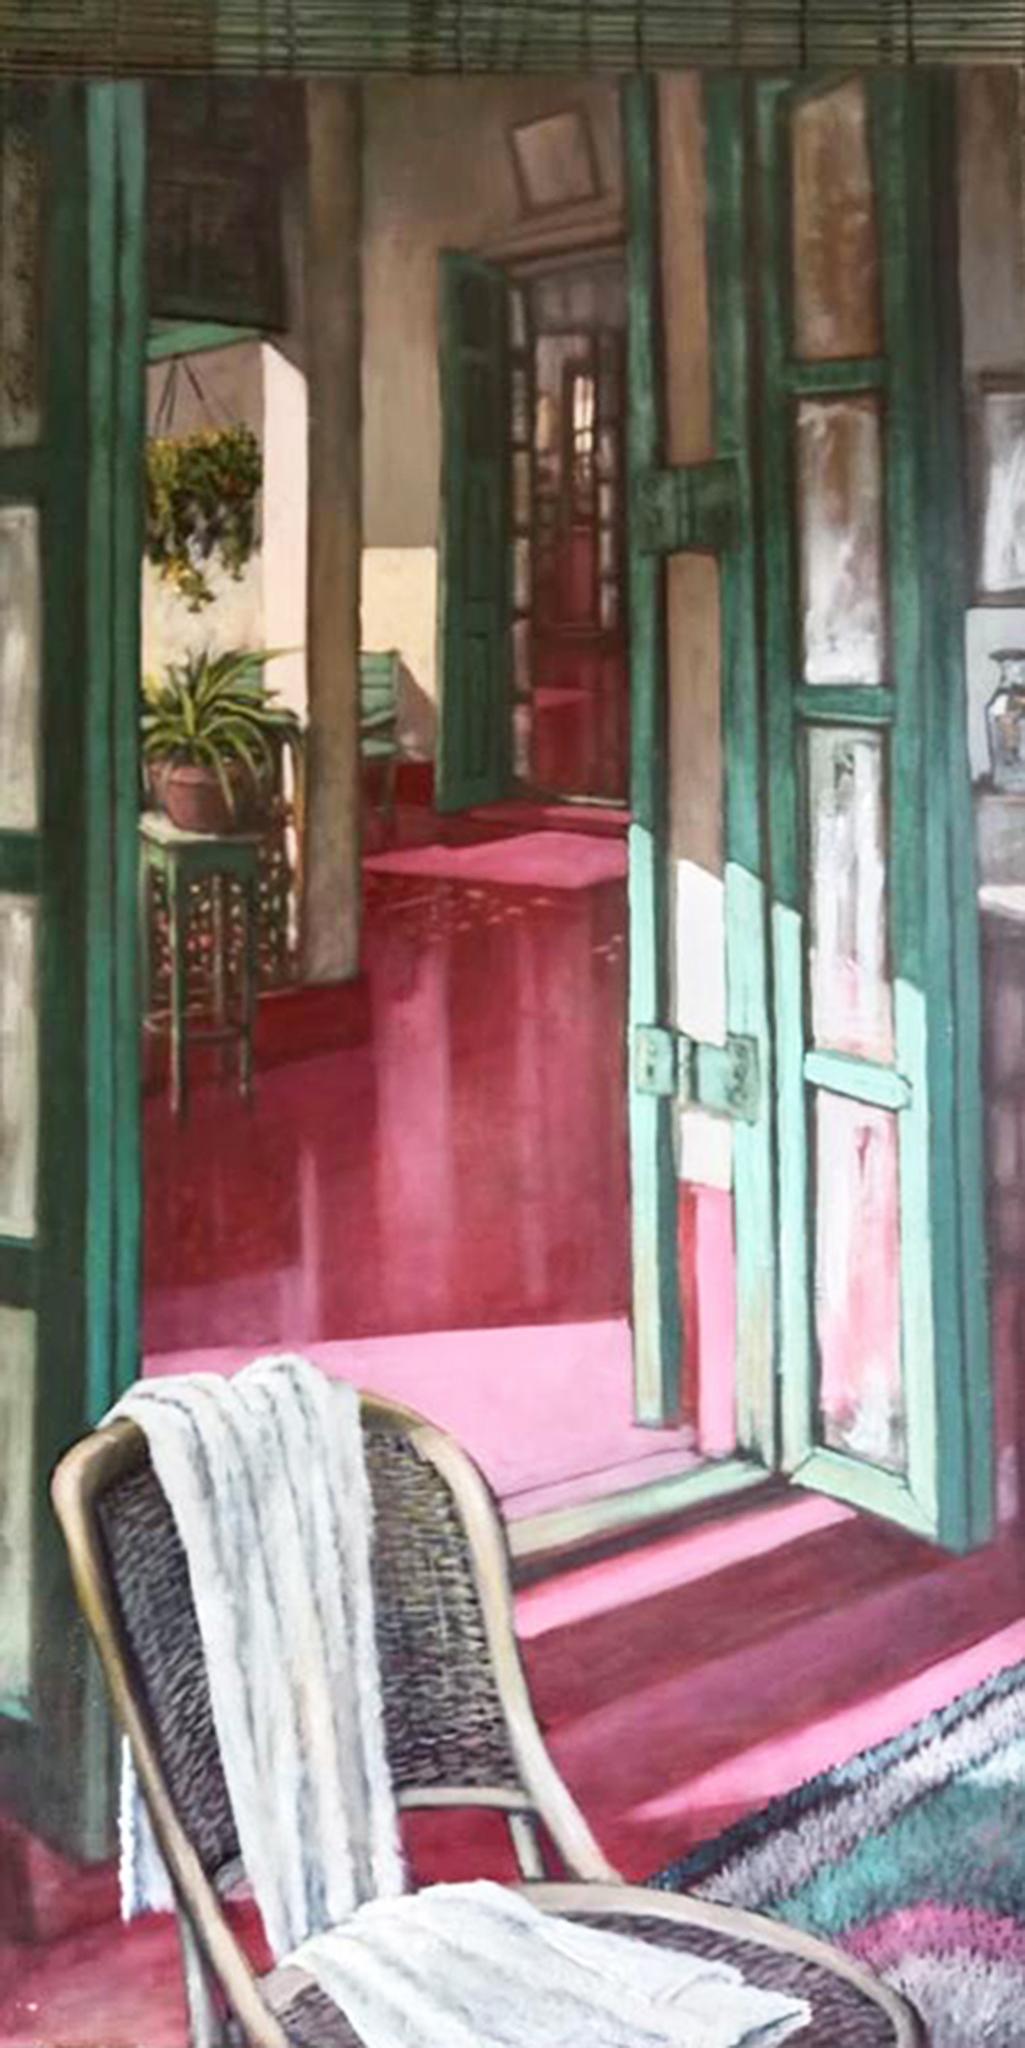 Subuddha Ghosh Figurative Painting - Untitled, Acrylic on Canvas, Pink, Green by Contemporary Artist "In Stock"